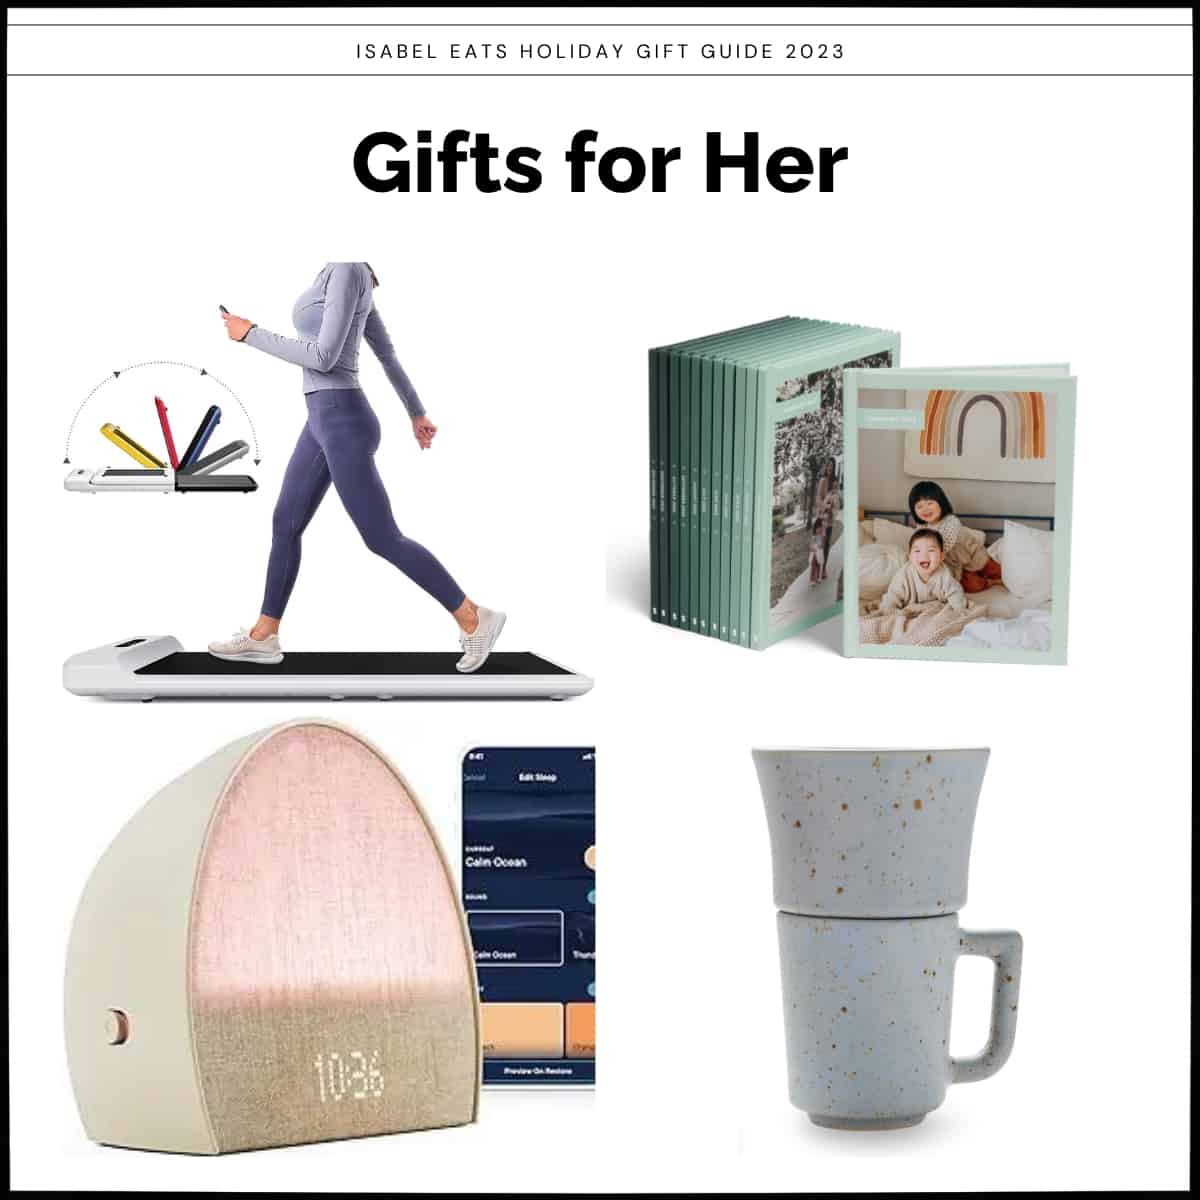 Gifts for Her collage